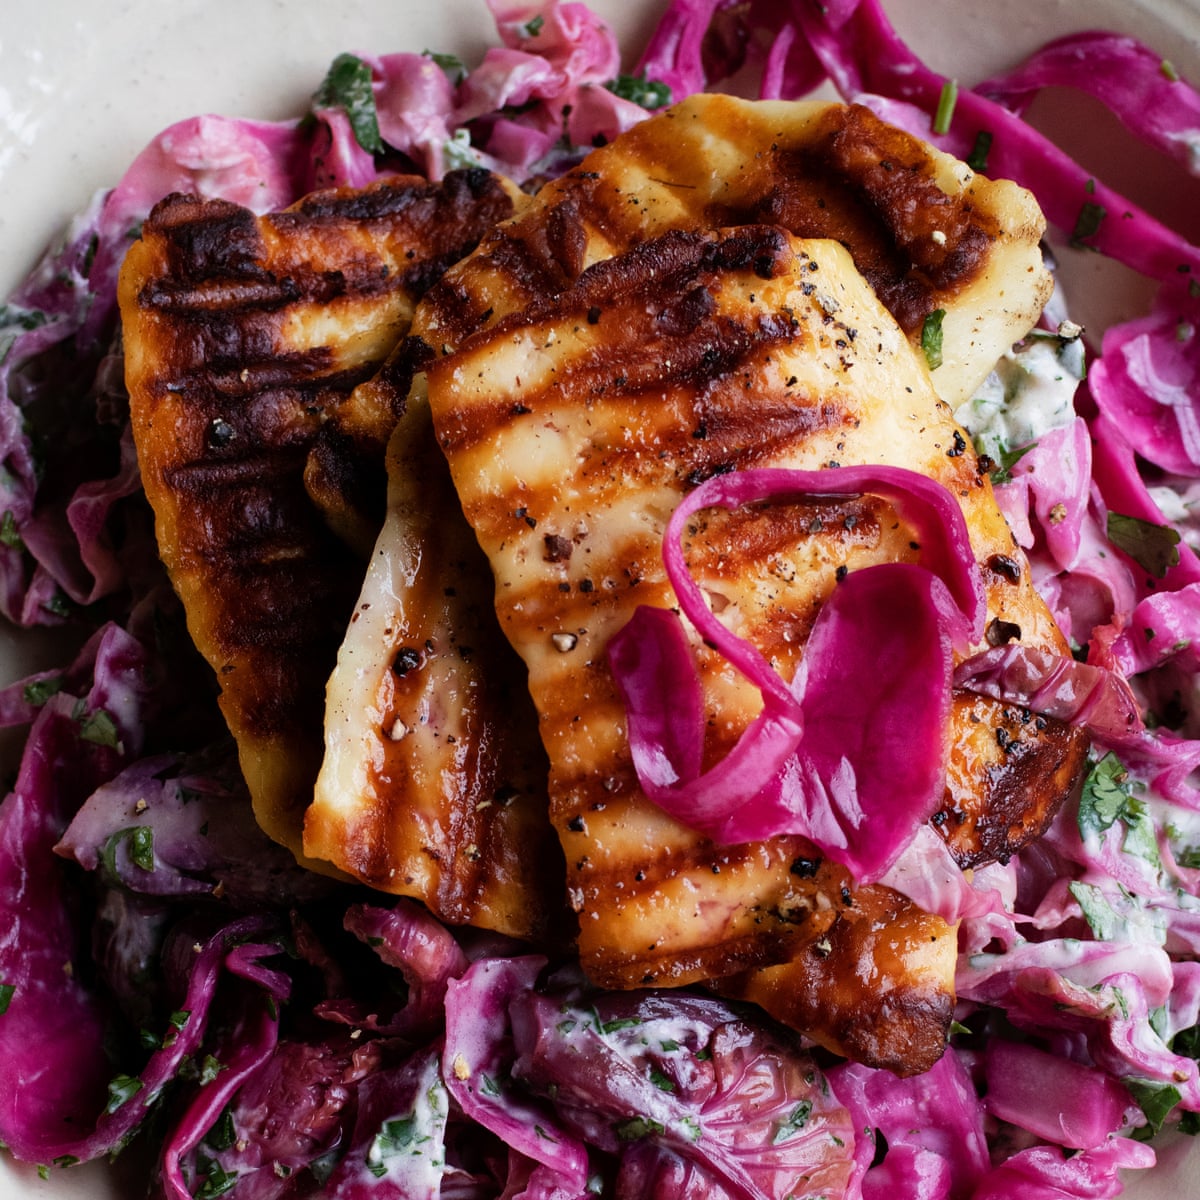 Nigel Slater’s recipe for halloumi with pickled slaw